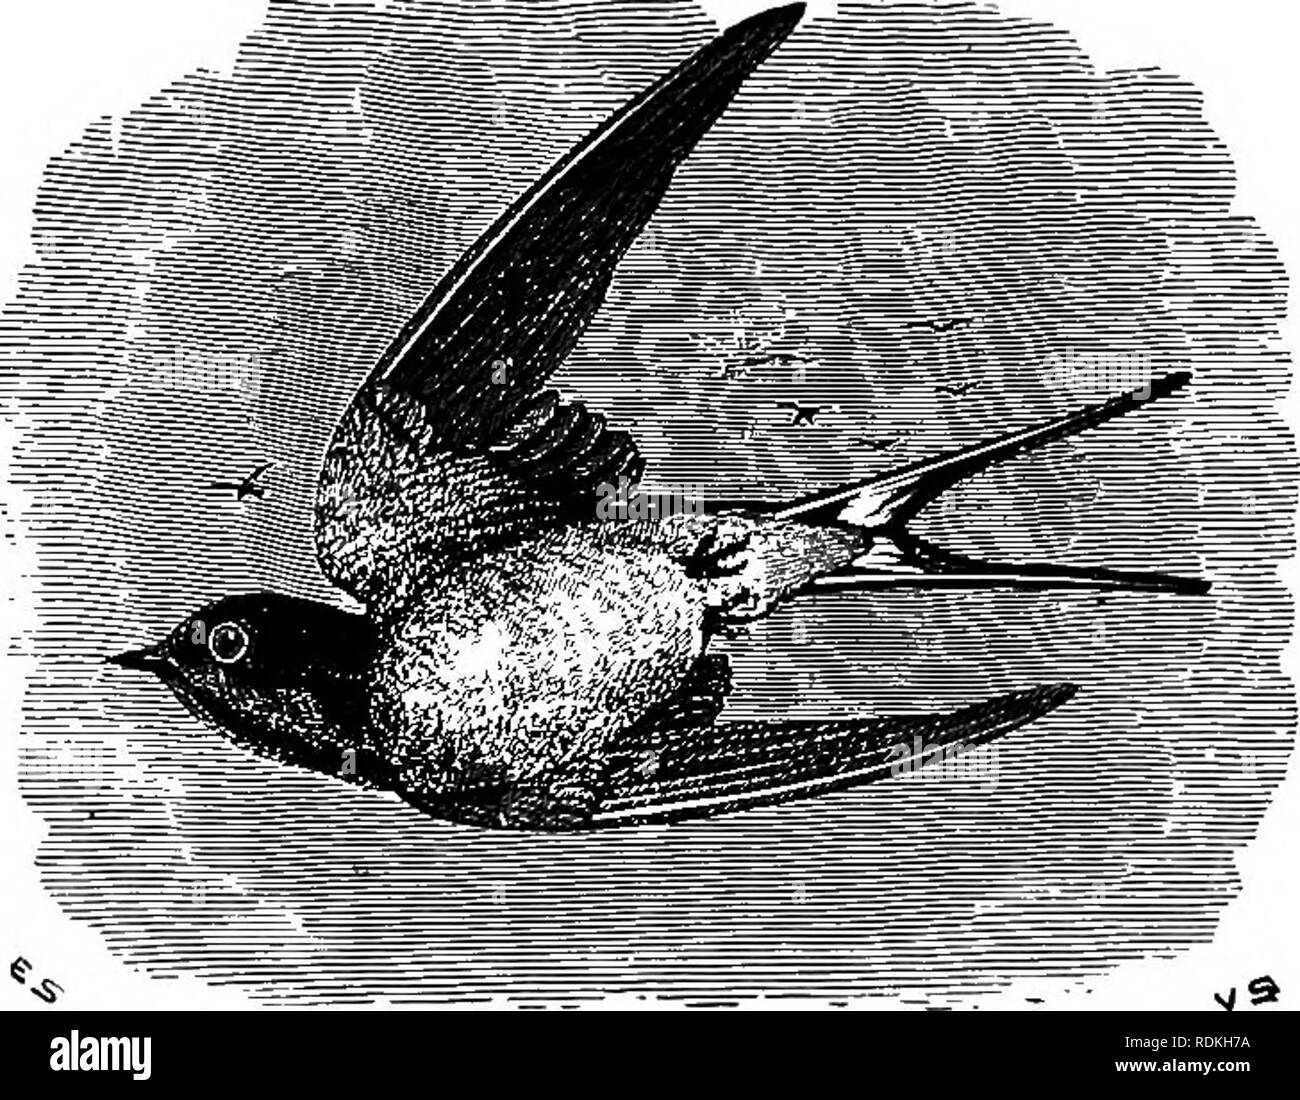 . The birds of Illinois and Wisconsin. Birds; Birds. 620 Field Museum of Natural History — Zoology, Vol. IX. Genus HIRUNDO Linn. 284. Hirundo erythrogastra Bodd. Barn Swallow. Chelidon erythrogastra (Bodd.), A. 0. U. Check List, 1895, p. 258. Distr.: Whole of North Araerica, north to Ungava, Hudson Bay and Alaska, breeding throughout its North American range and in northern Mexico; south in winter throughout Central America, the West Indies, and a considerable portion of South America. Adult male: Tail, much forked; upper plumage, lustrous dark steel-blue; forehead and throat, rufous chestnut; Stock Photo